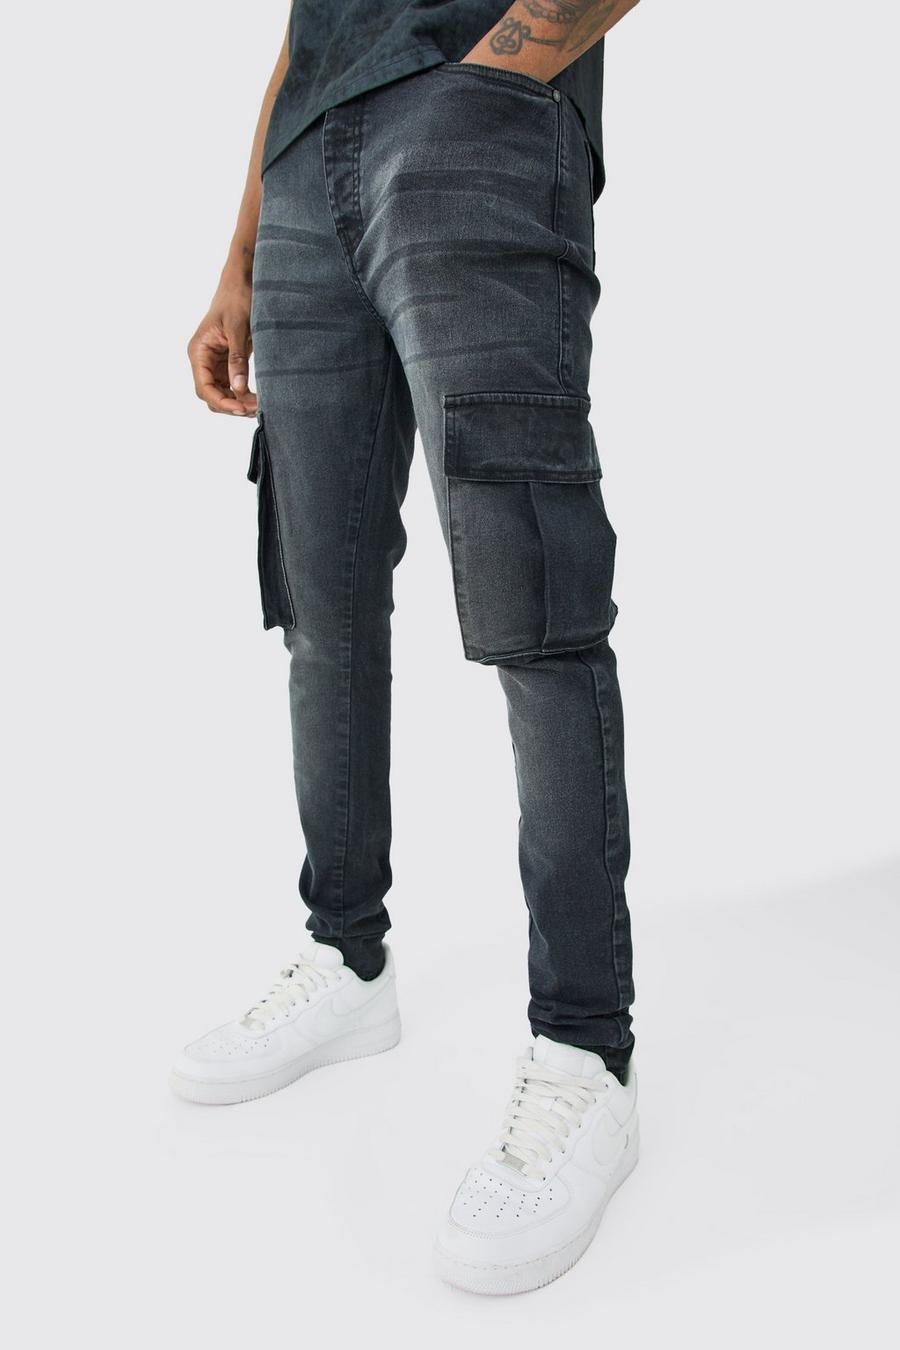 Tall - Jean cargo super skinny, Washed black